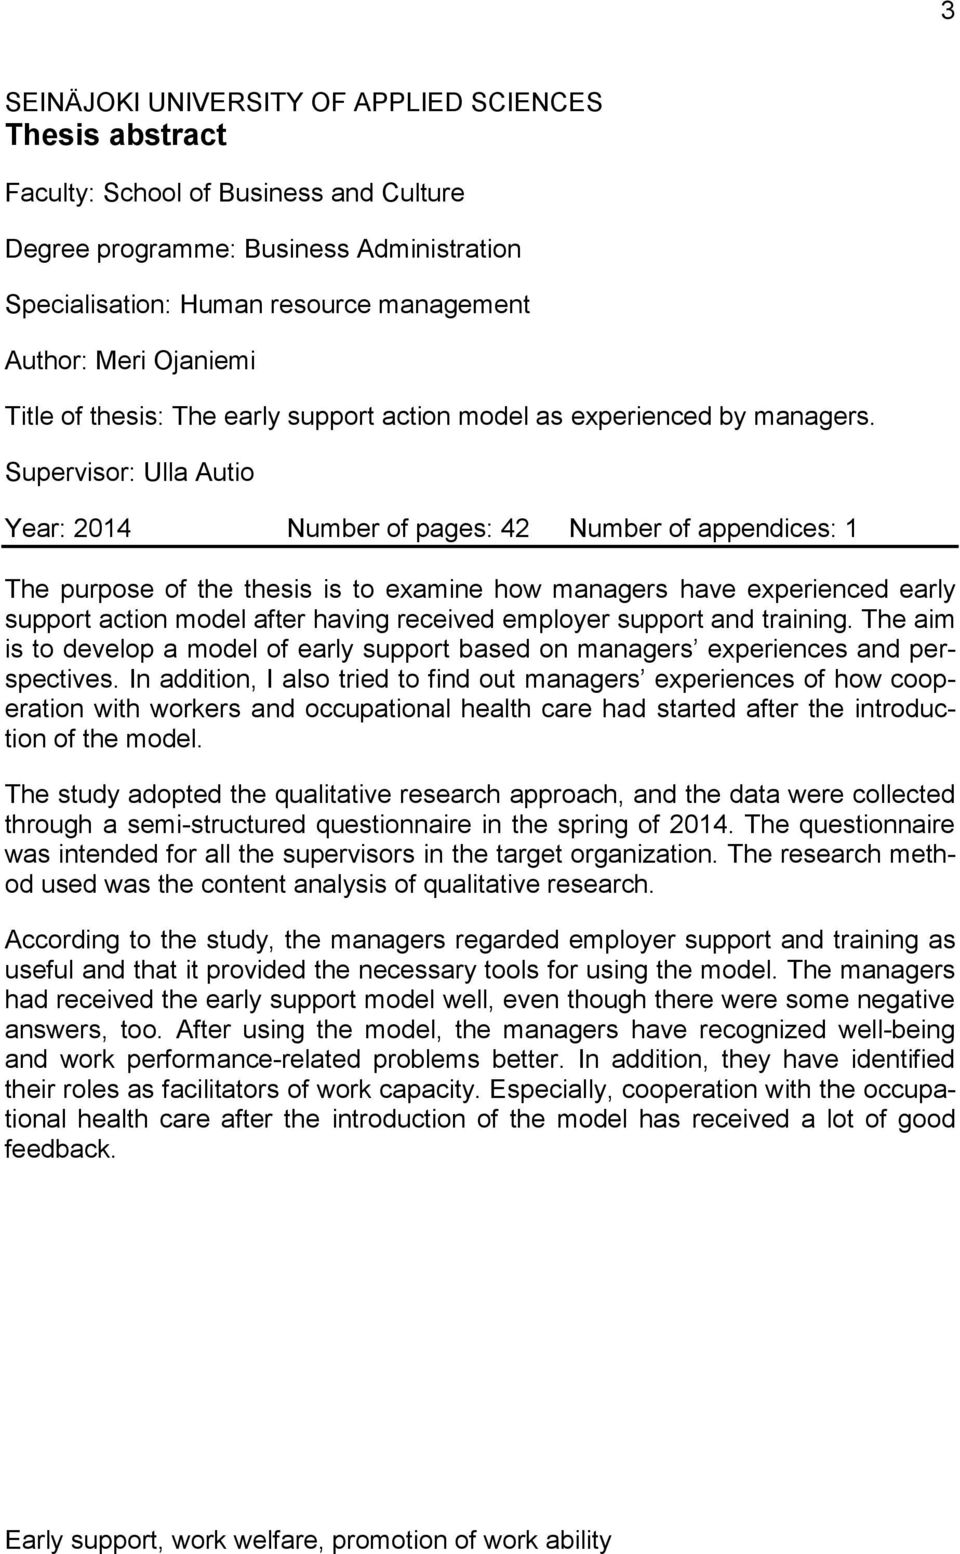 Supervisor: Ulla Autio Year: 2014 Number of pages: 42 Number of appendices: 1 The purpose of the thesis is to examine how managers have experienced early support action model after having received